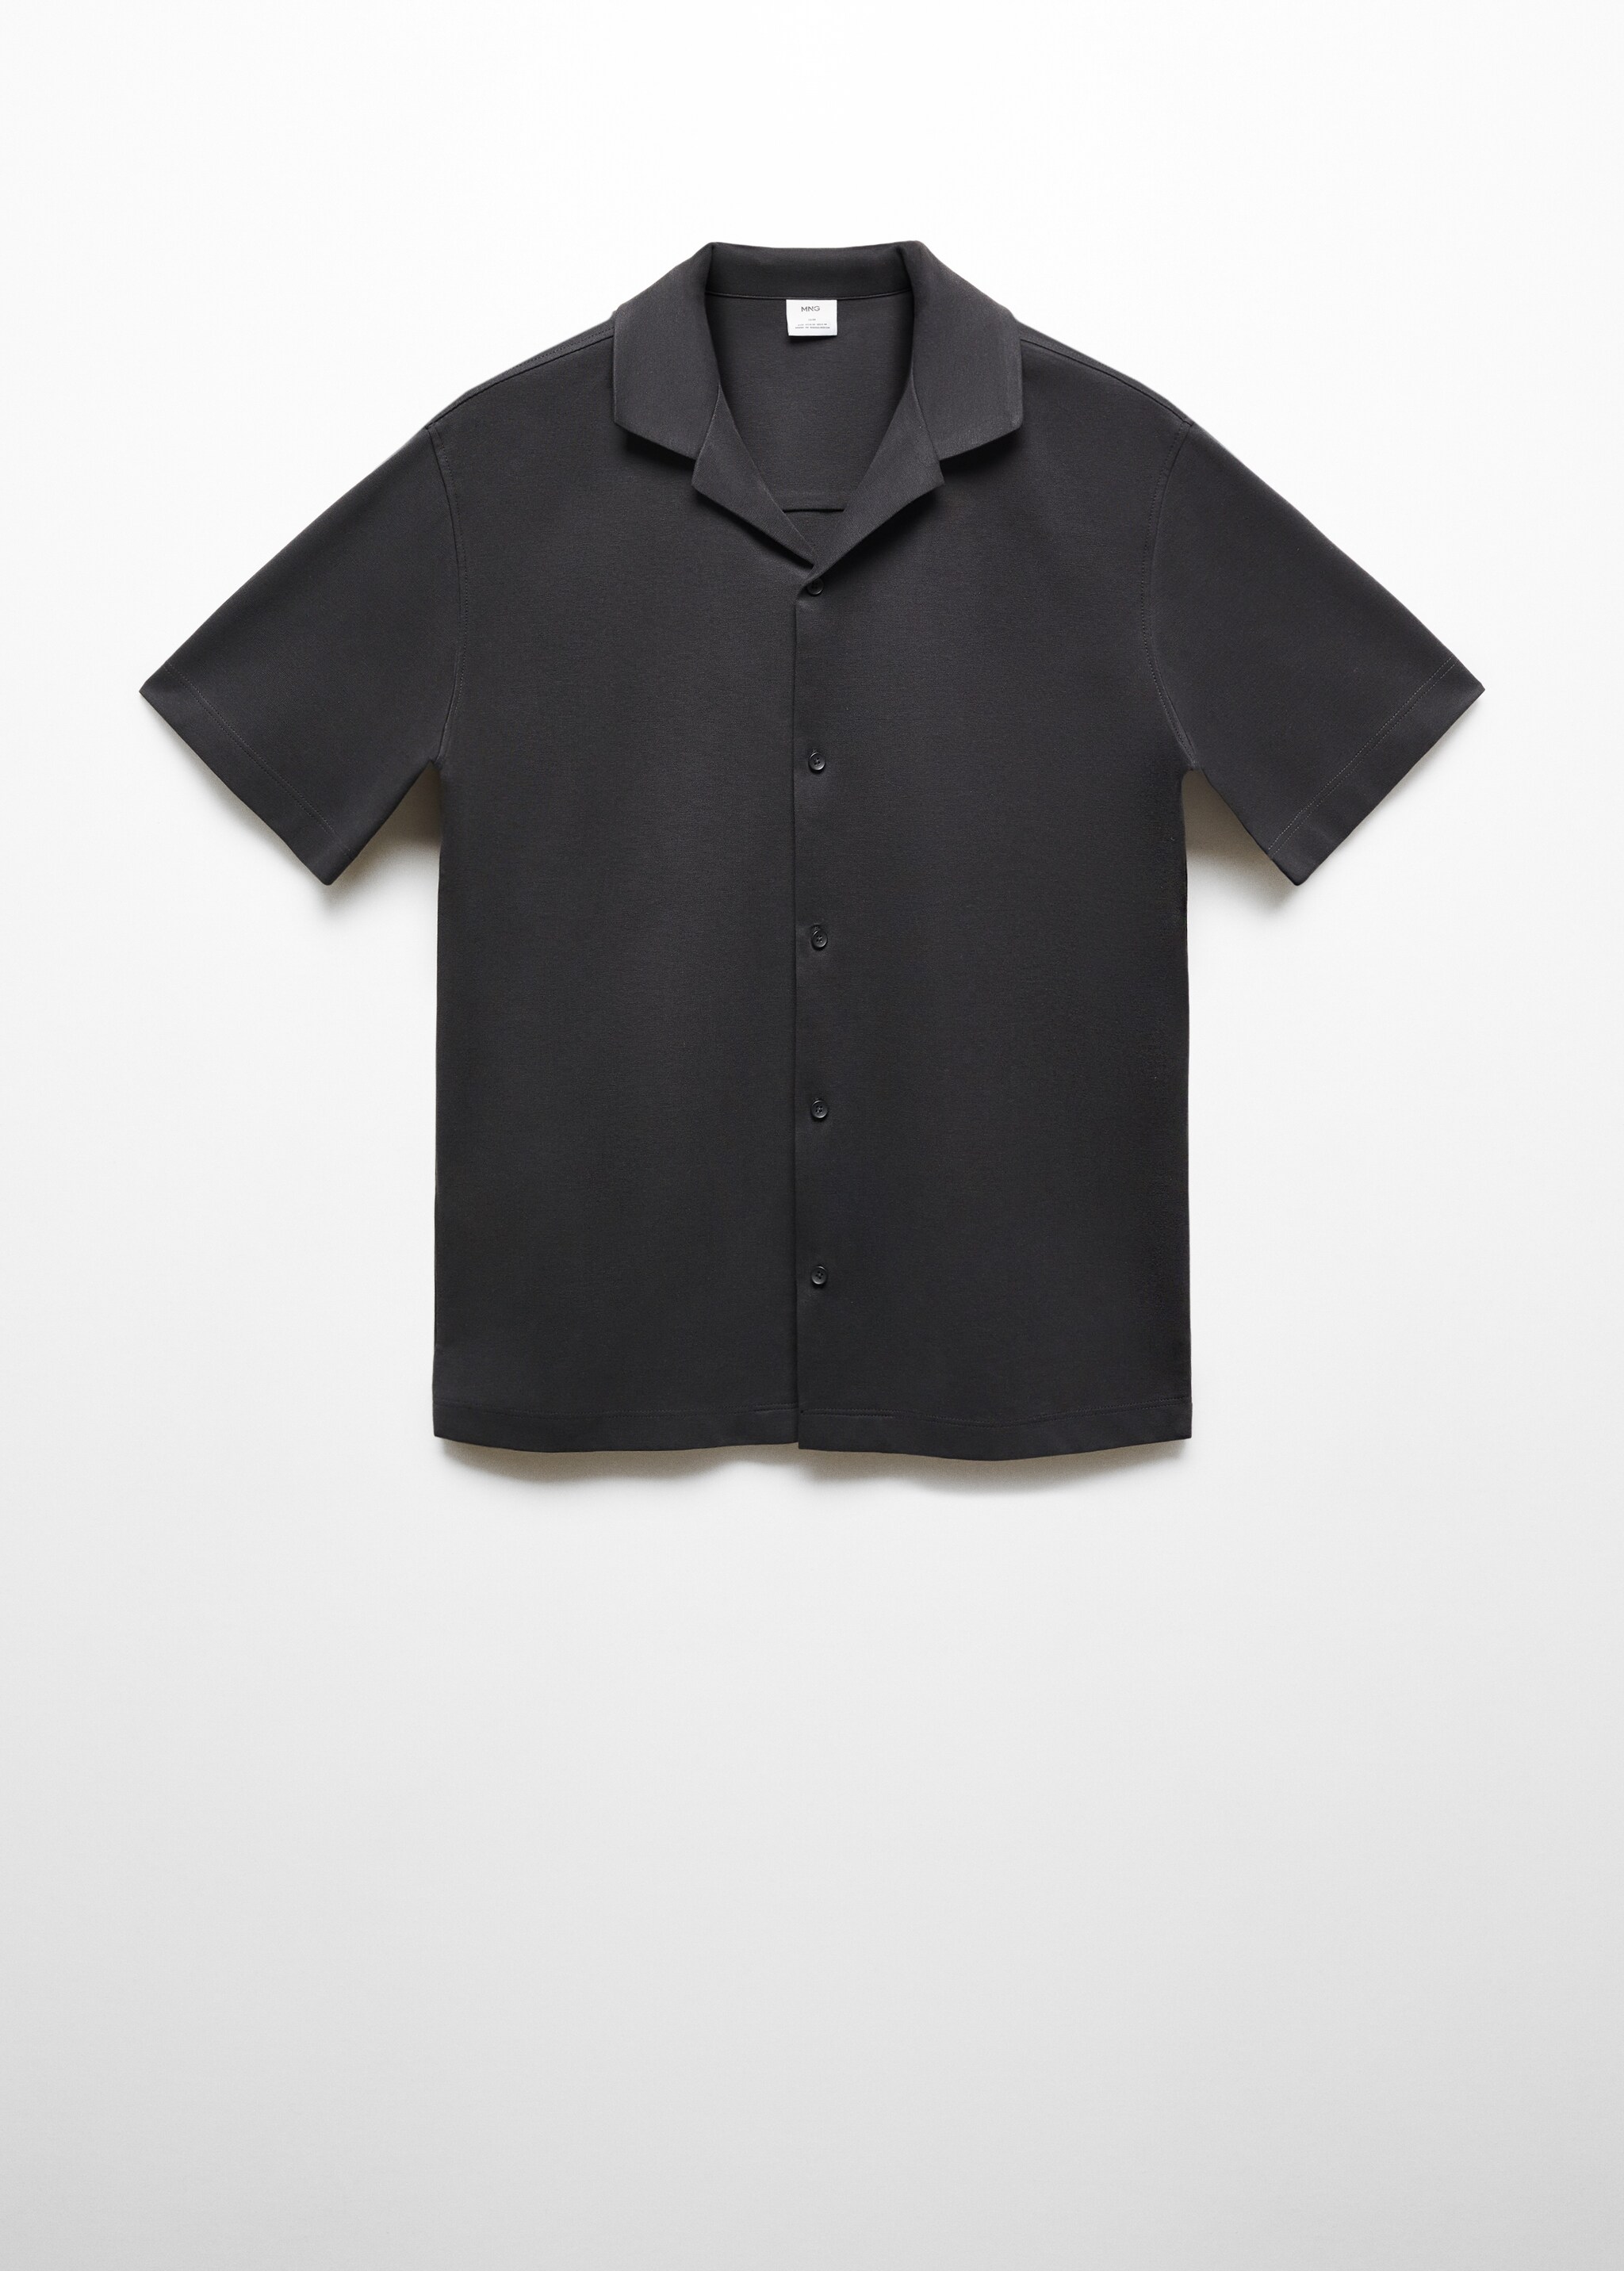 Short sleeved cotton shirt - Article without model